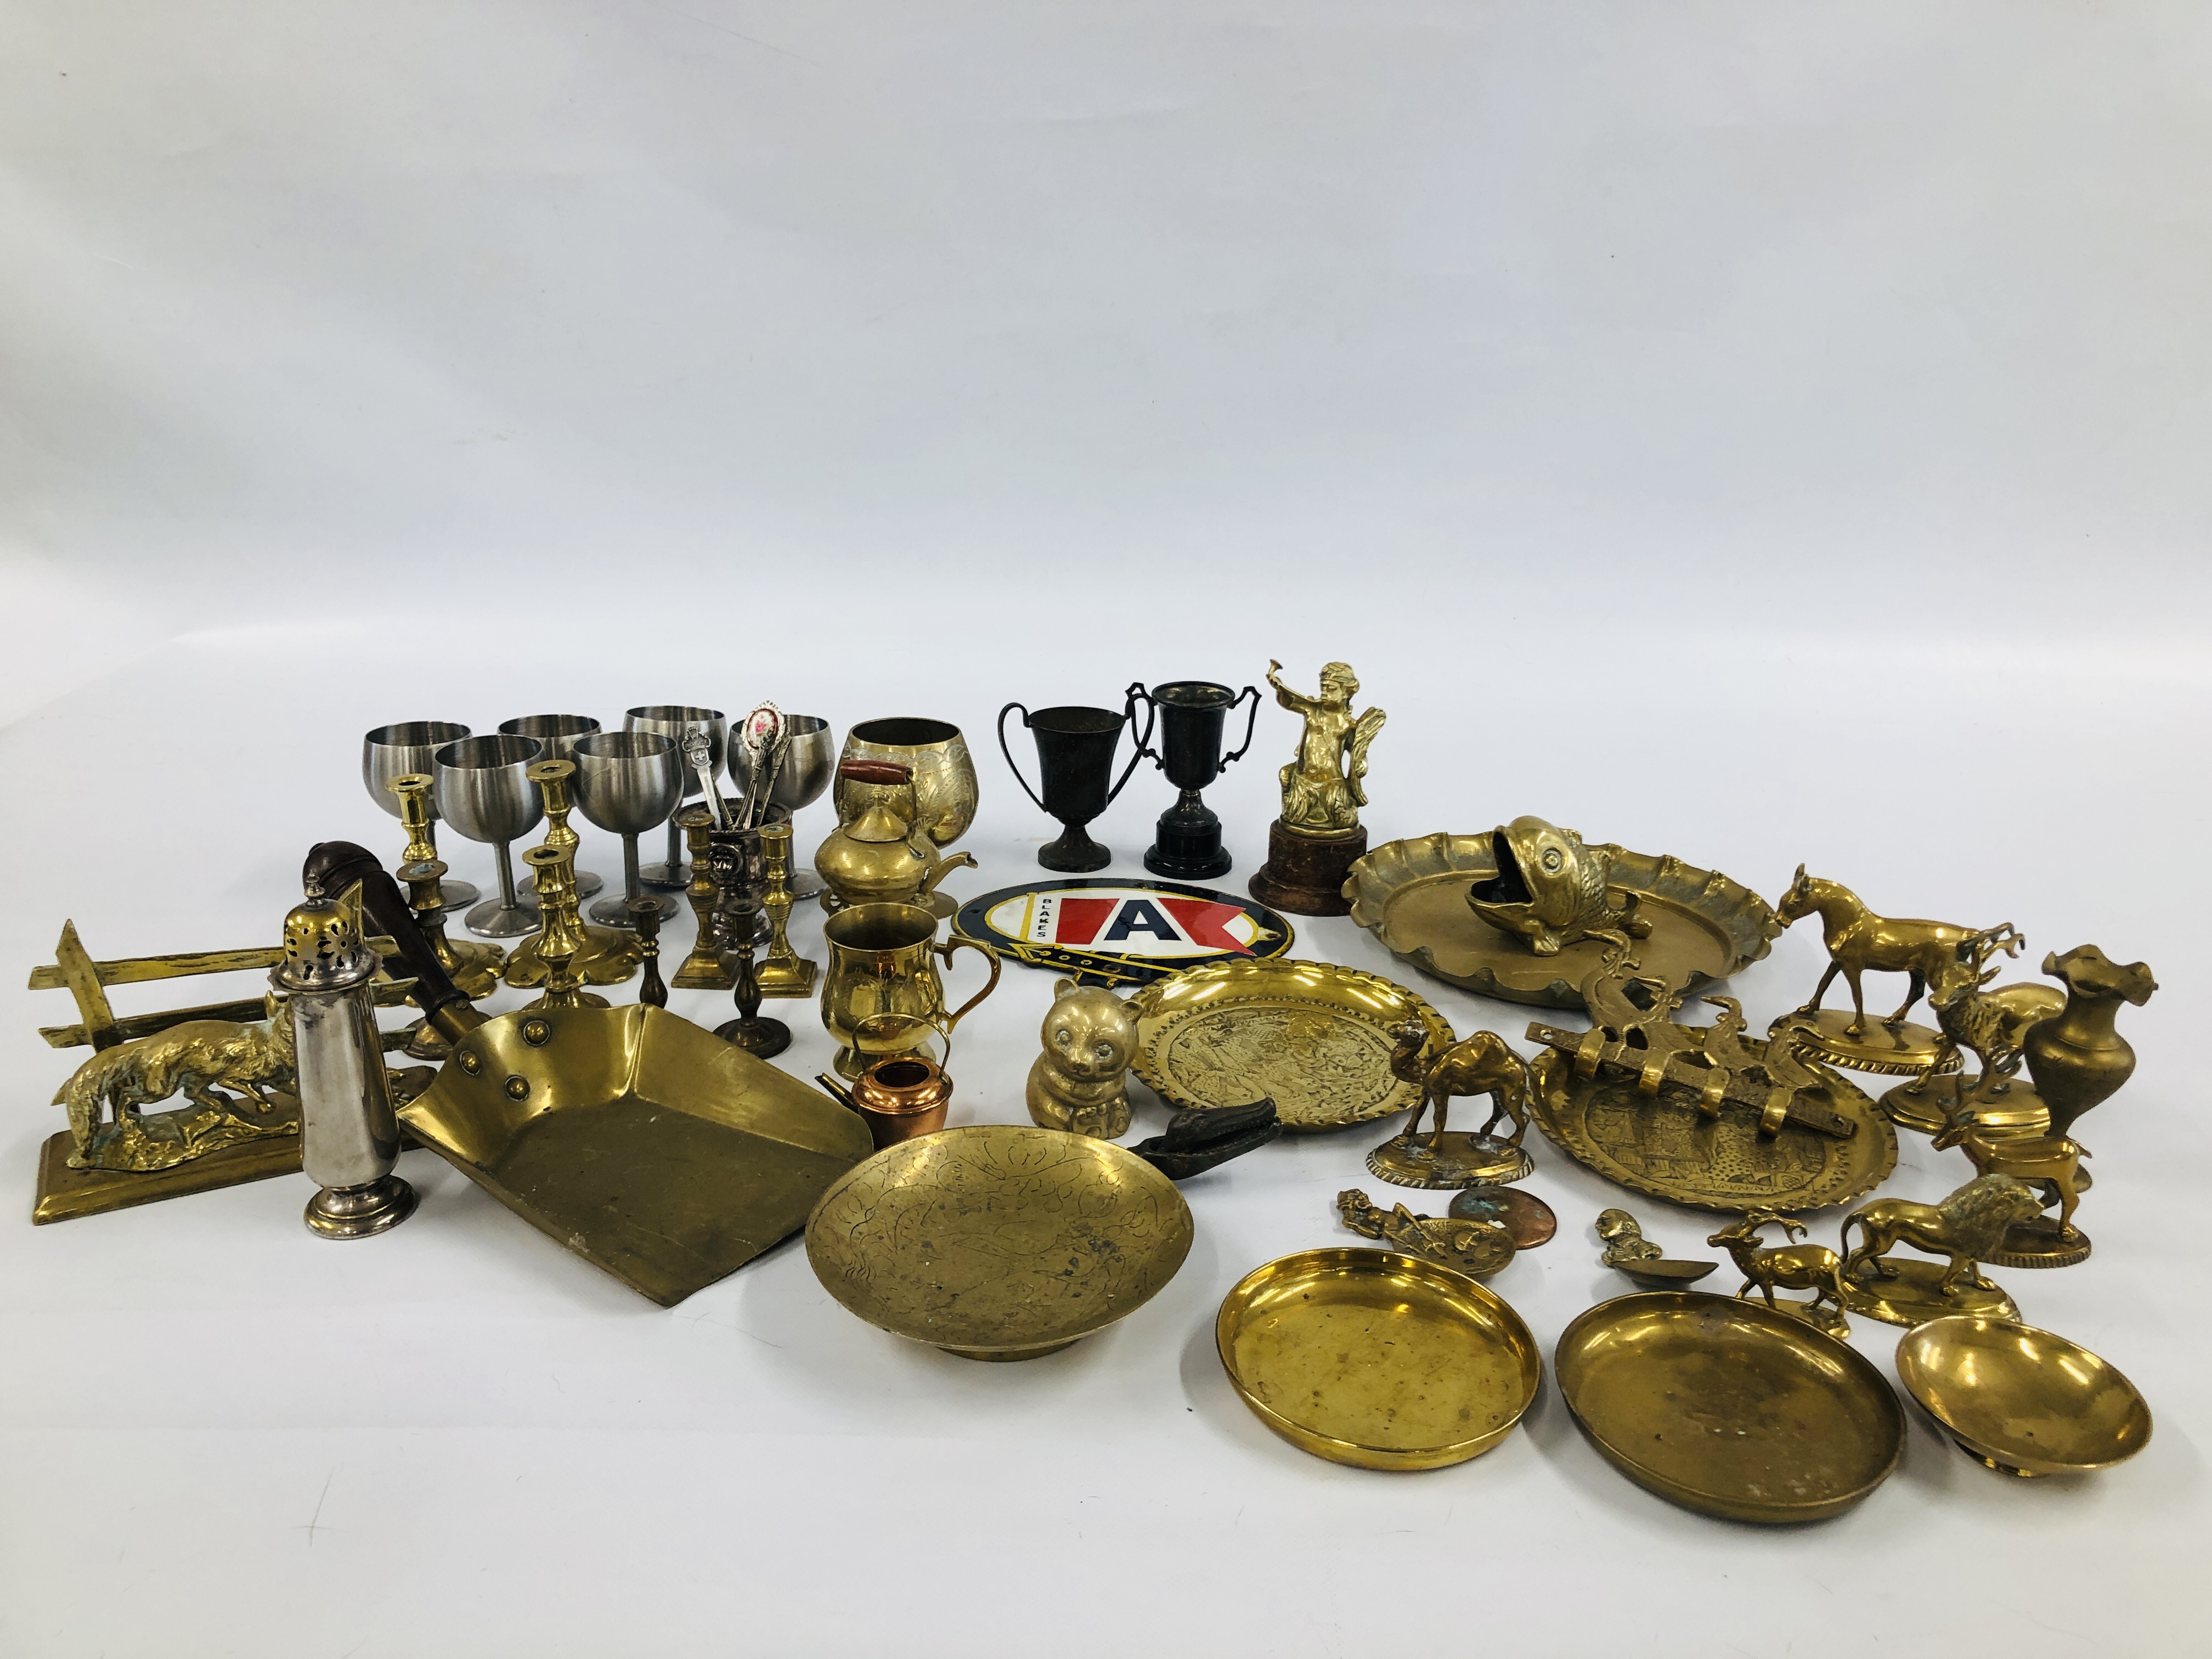 A SMALL COLLECTION OF MIXED BRASS AND METAL WARES ALONG WITH A VINTAGE BLAKES ENAMELLED SIGN.